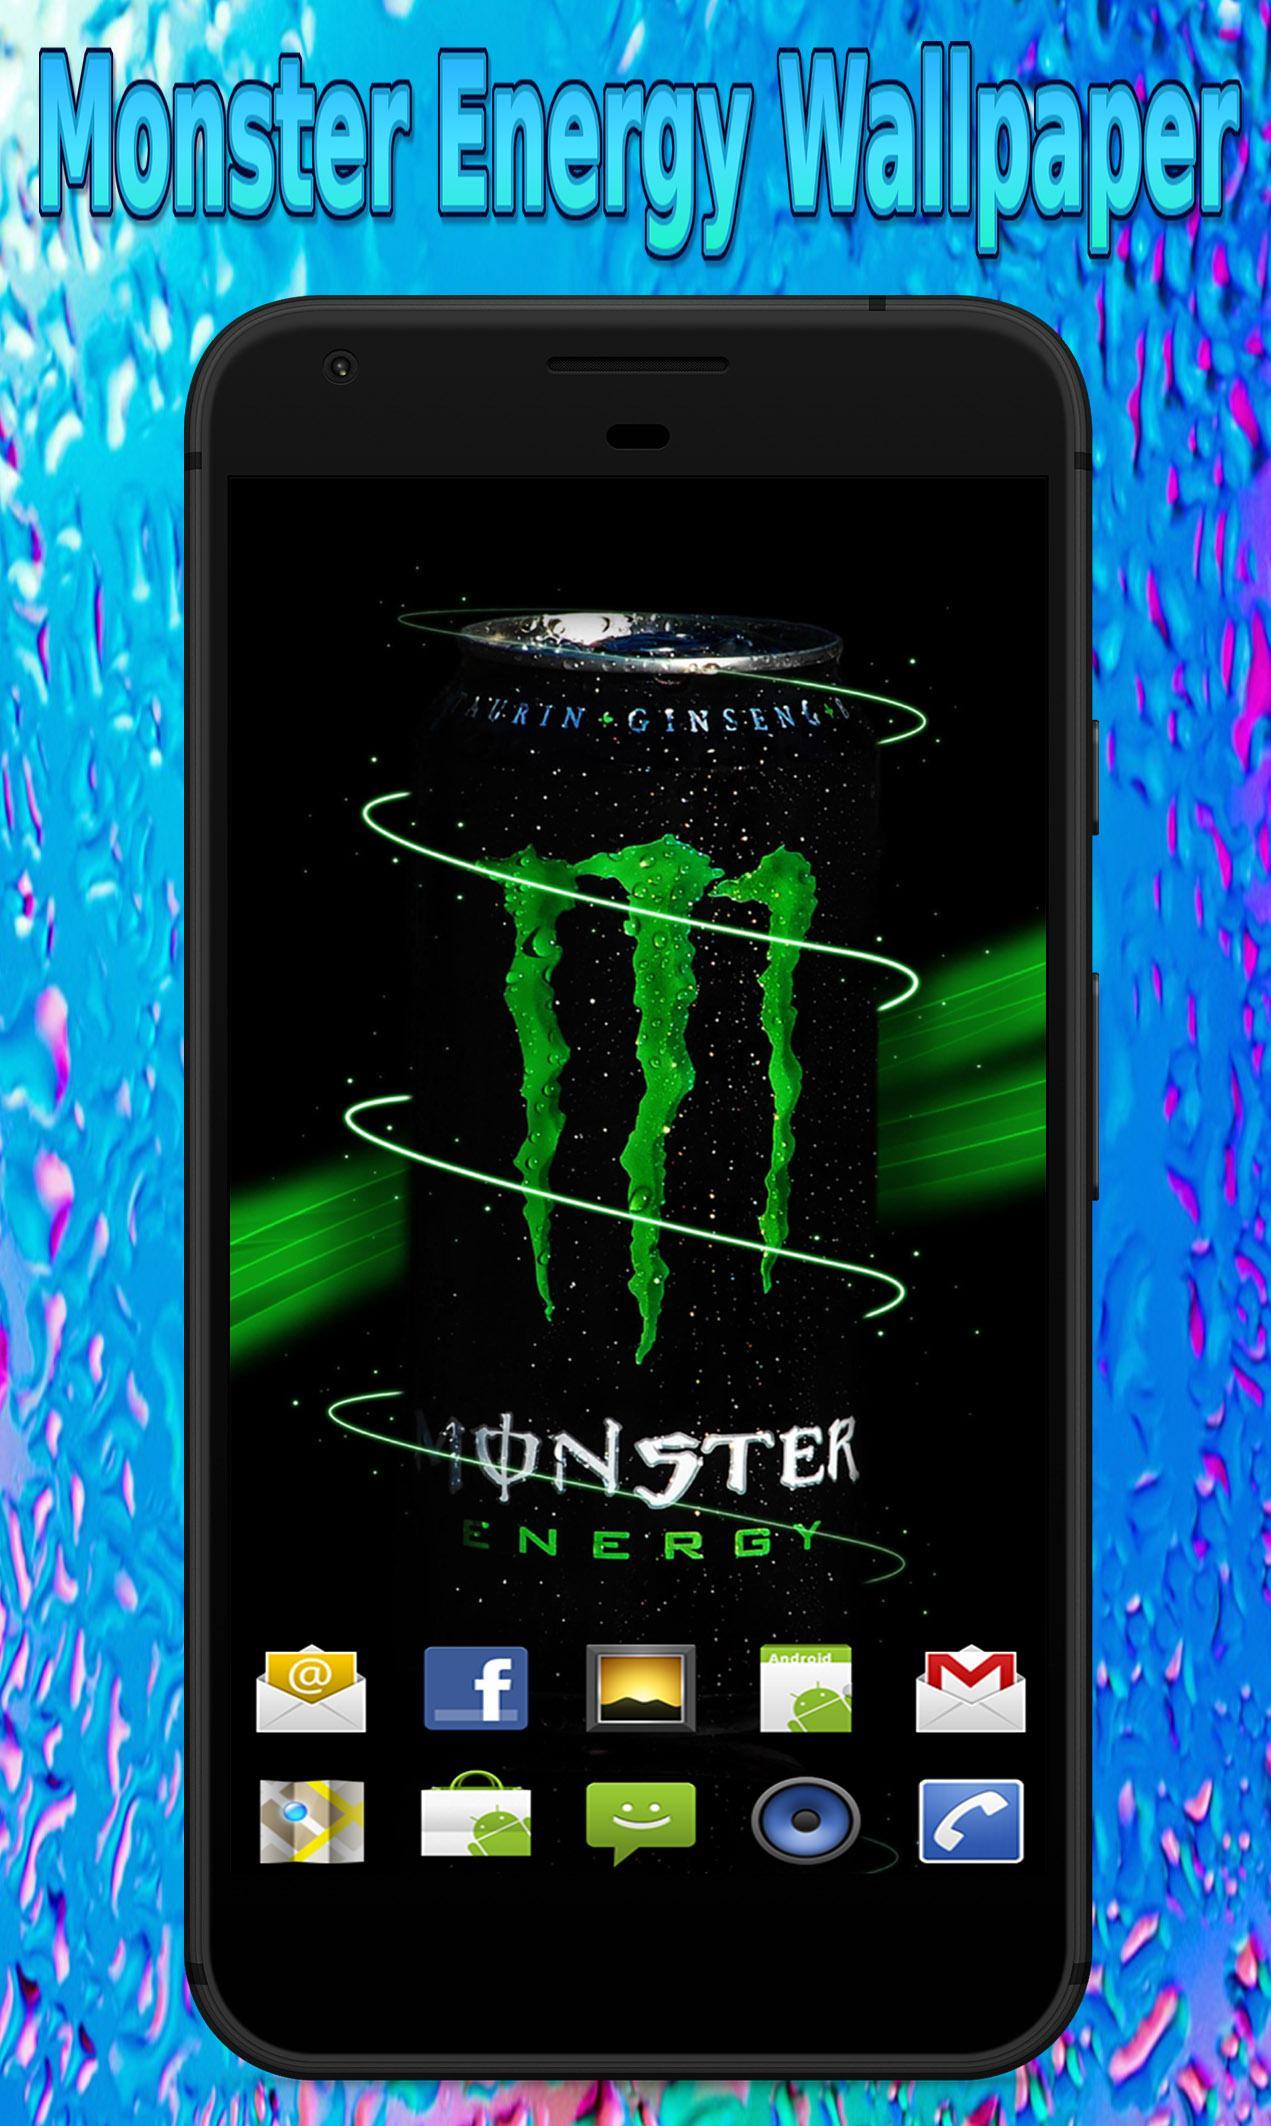 Hd Monster Energy Wallpaper For Android Apk Download